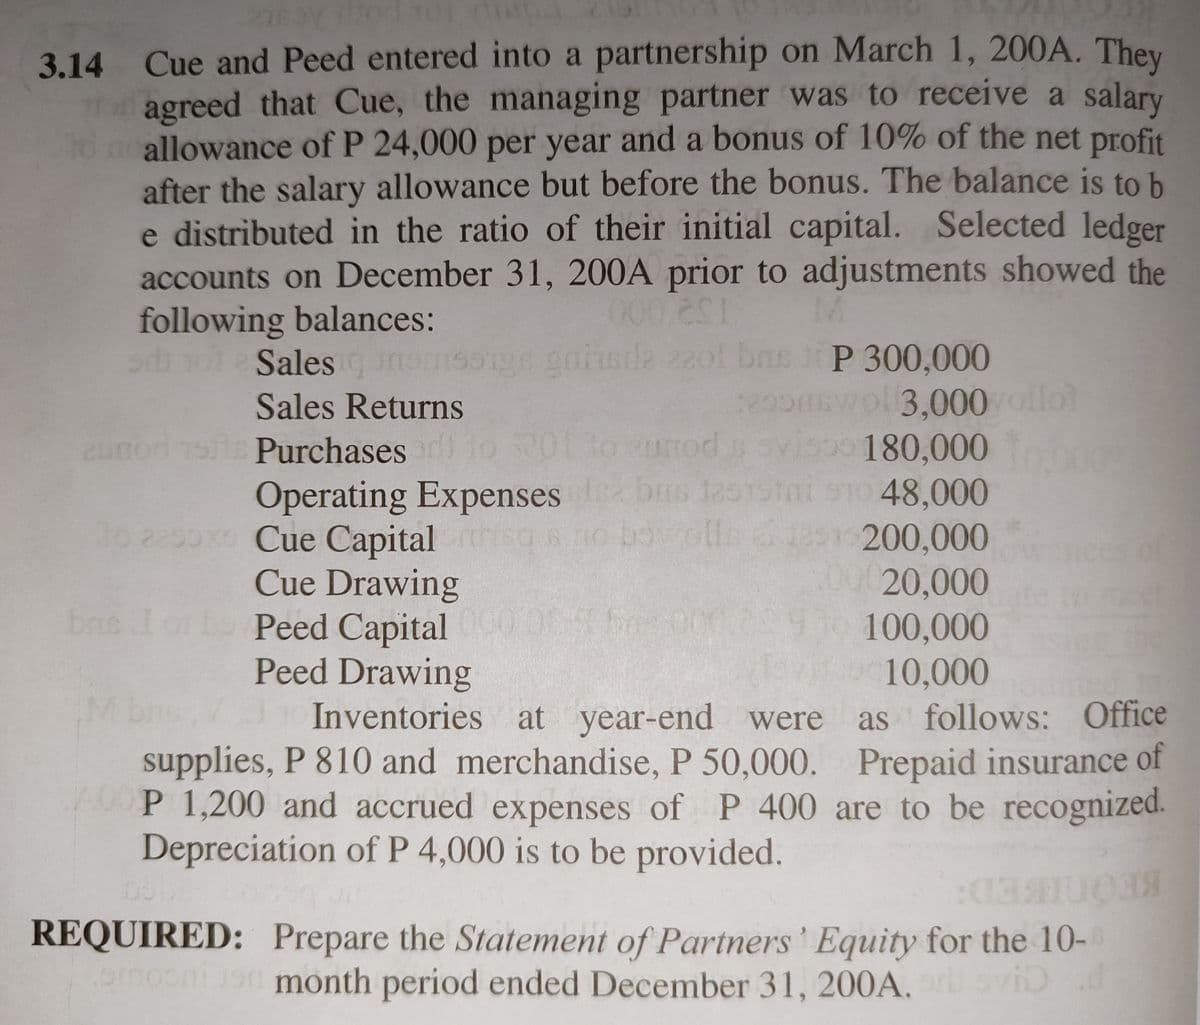 3.14 Cue and Peed entered into a partnership on March 1, 200A. They
T agreed that Cue, the managing partner was to receive a salary
10 neallowance of P 24,000 per year and a bonus of 10% of the net profit
after the salary allowance but before the bonus. The balance is to b
e distributed in the ratio of their initial capital. Selected ledger
accounts on December 31, 200A prior to adjustments showed the
following balances:
Salesgns 22ol bns P 300,000
ge gnisda
o3,000 ollo)
visoo 180,000
1sini s10 48,000
Sales Returns
290sw
zunod ts Purchases 1
Operating Expenses bs la01Stni o1o 48,000
200,000
00020,000
1o g
2290x Cue Capital
Cue Drawing
Peed Capital 0
Peed Drawing
Inventories at year-end were
bns I
100,000
10,000
as follows: Office
supplies, P 810 and merchandise, P 50,000. Prepaid insurance of
0P 1,200 and accrued expenses of P 400 are to be recognized.
Depreciation of P 4,000 is to be provided.
REQUIRED: Prepare the Statement of Partners ' Equity for the 10-
month period ended December 31, 200A.
iD d
